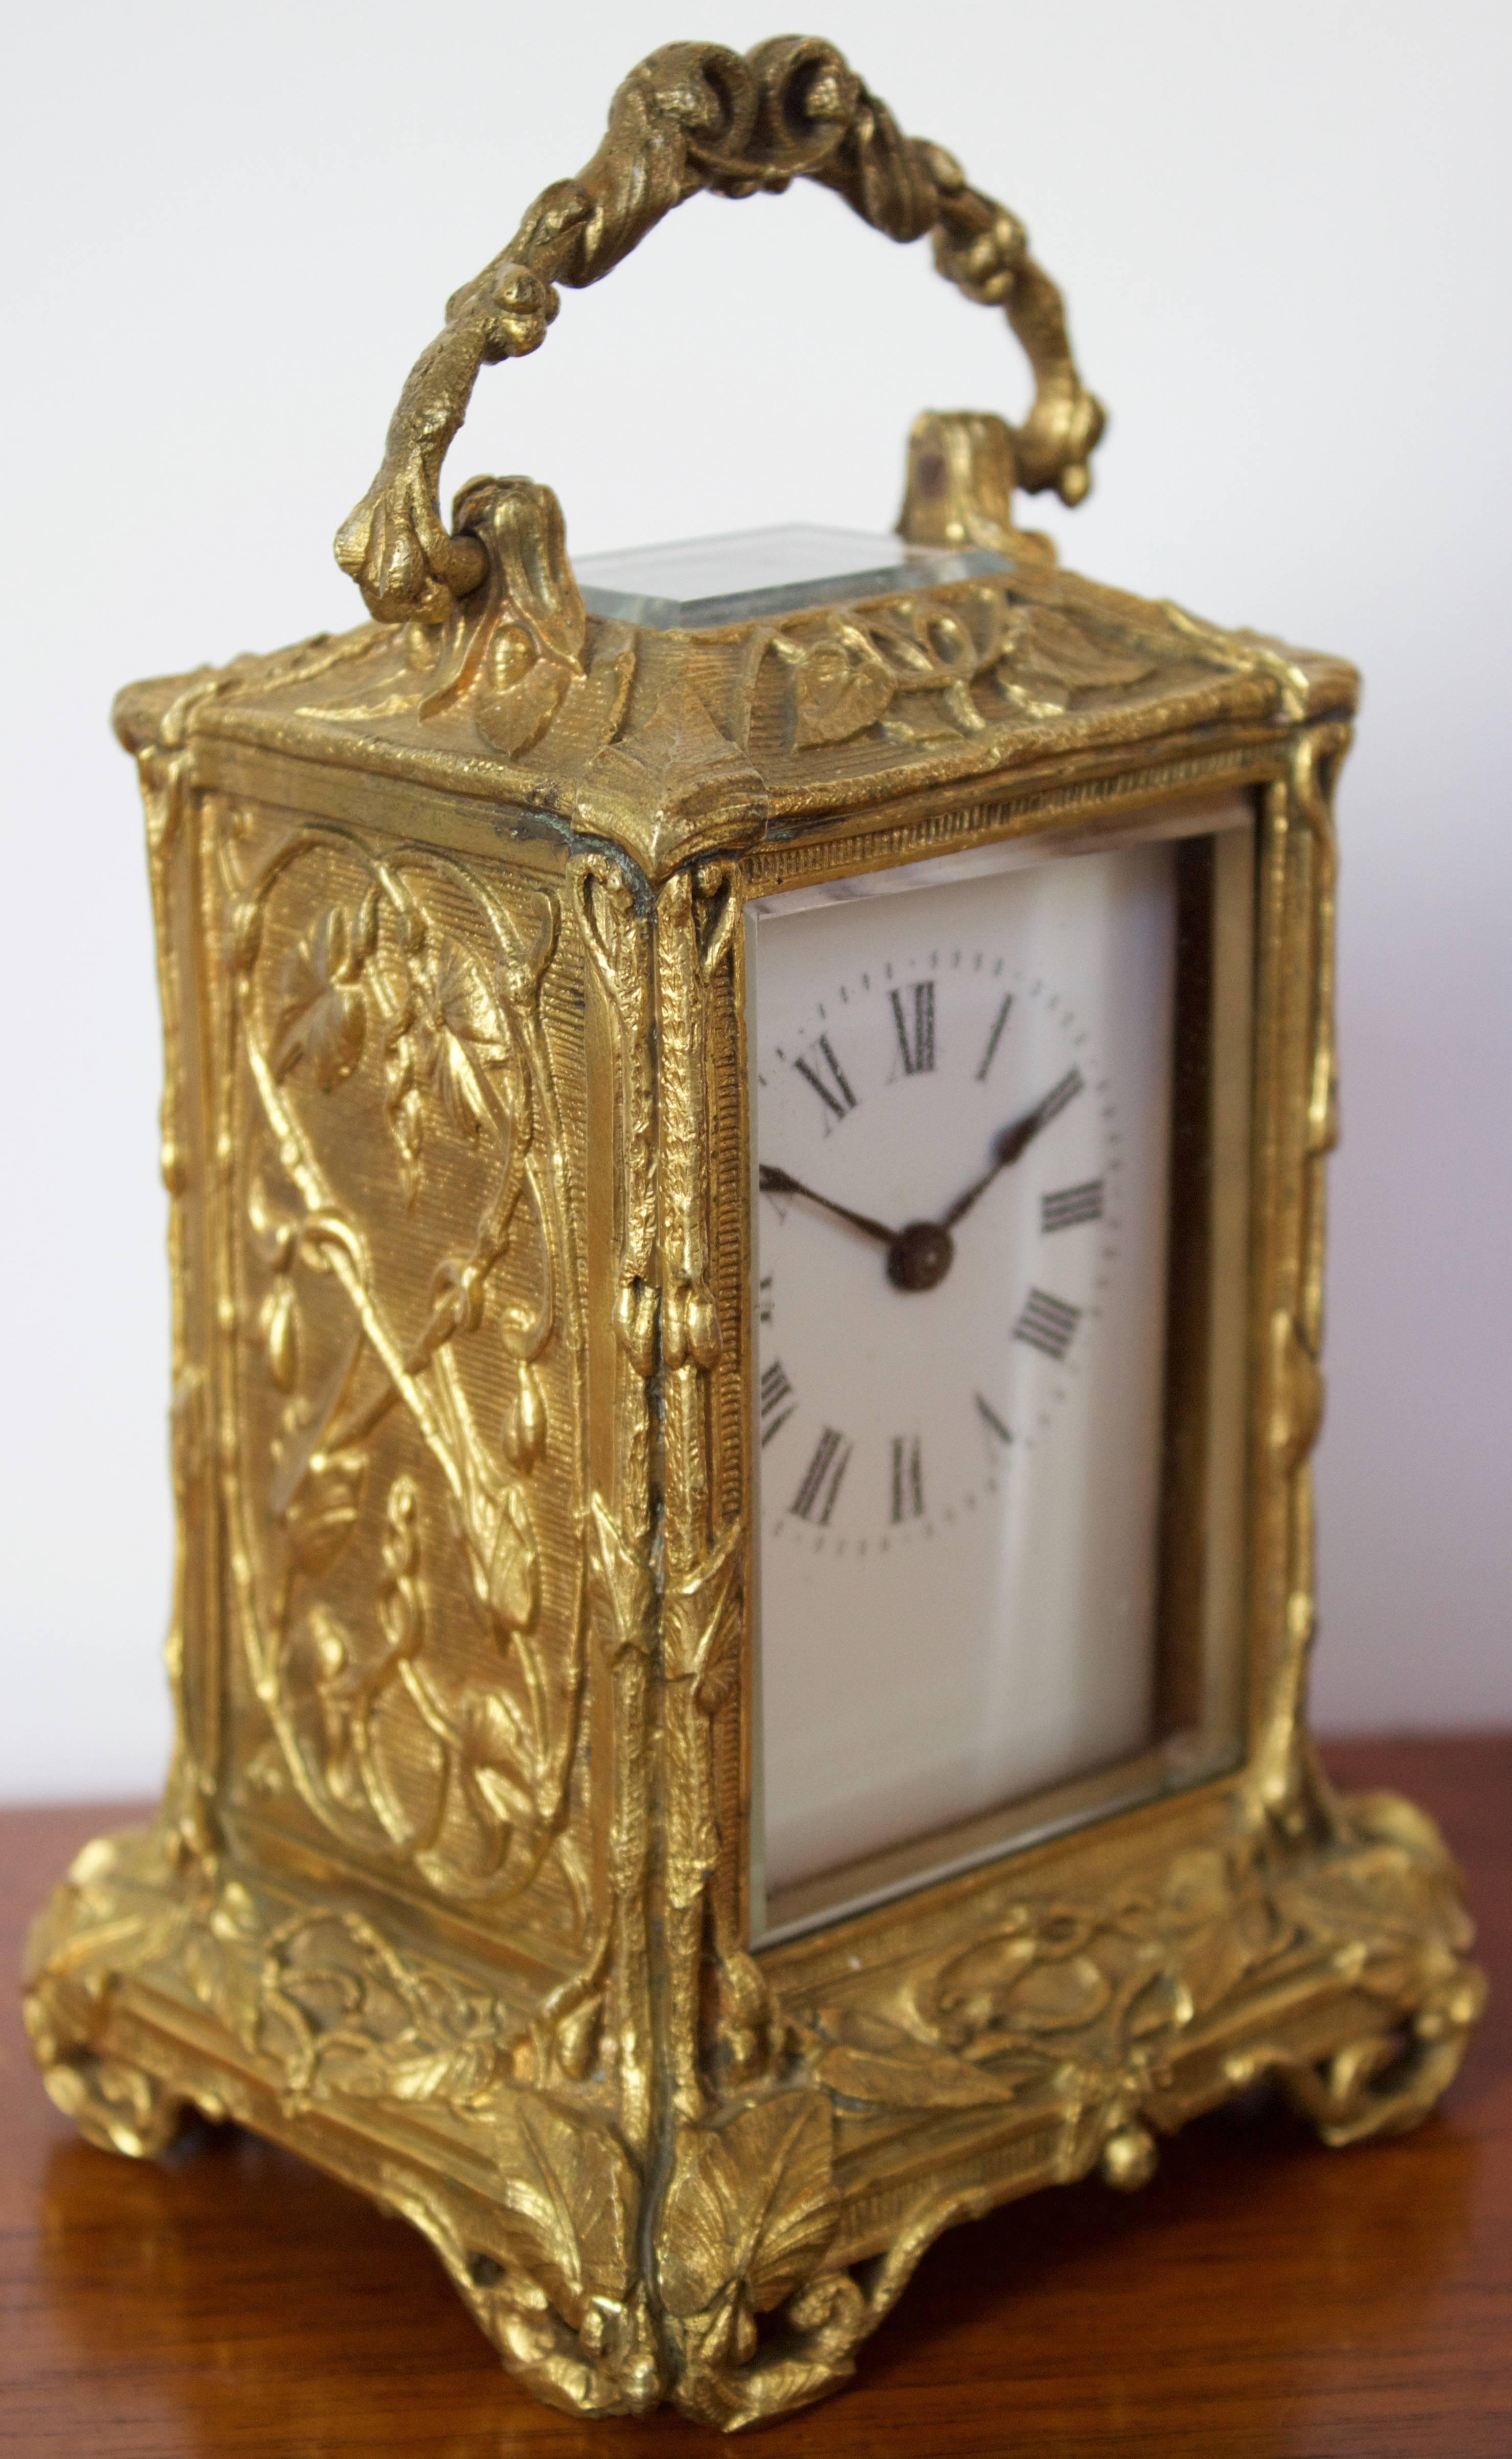 A lovely French carriage clock in a bronze dore case finely decorated with a scrolling vine decor, pierced bracket floral form feet and surmounted by a hinged loop handle. Enameled dial with Roman numerals and beveled glass panel in front and on